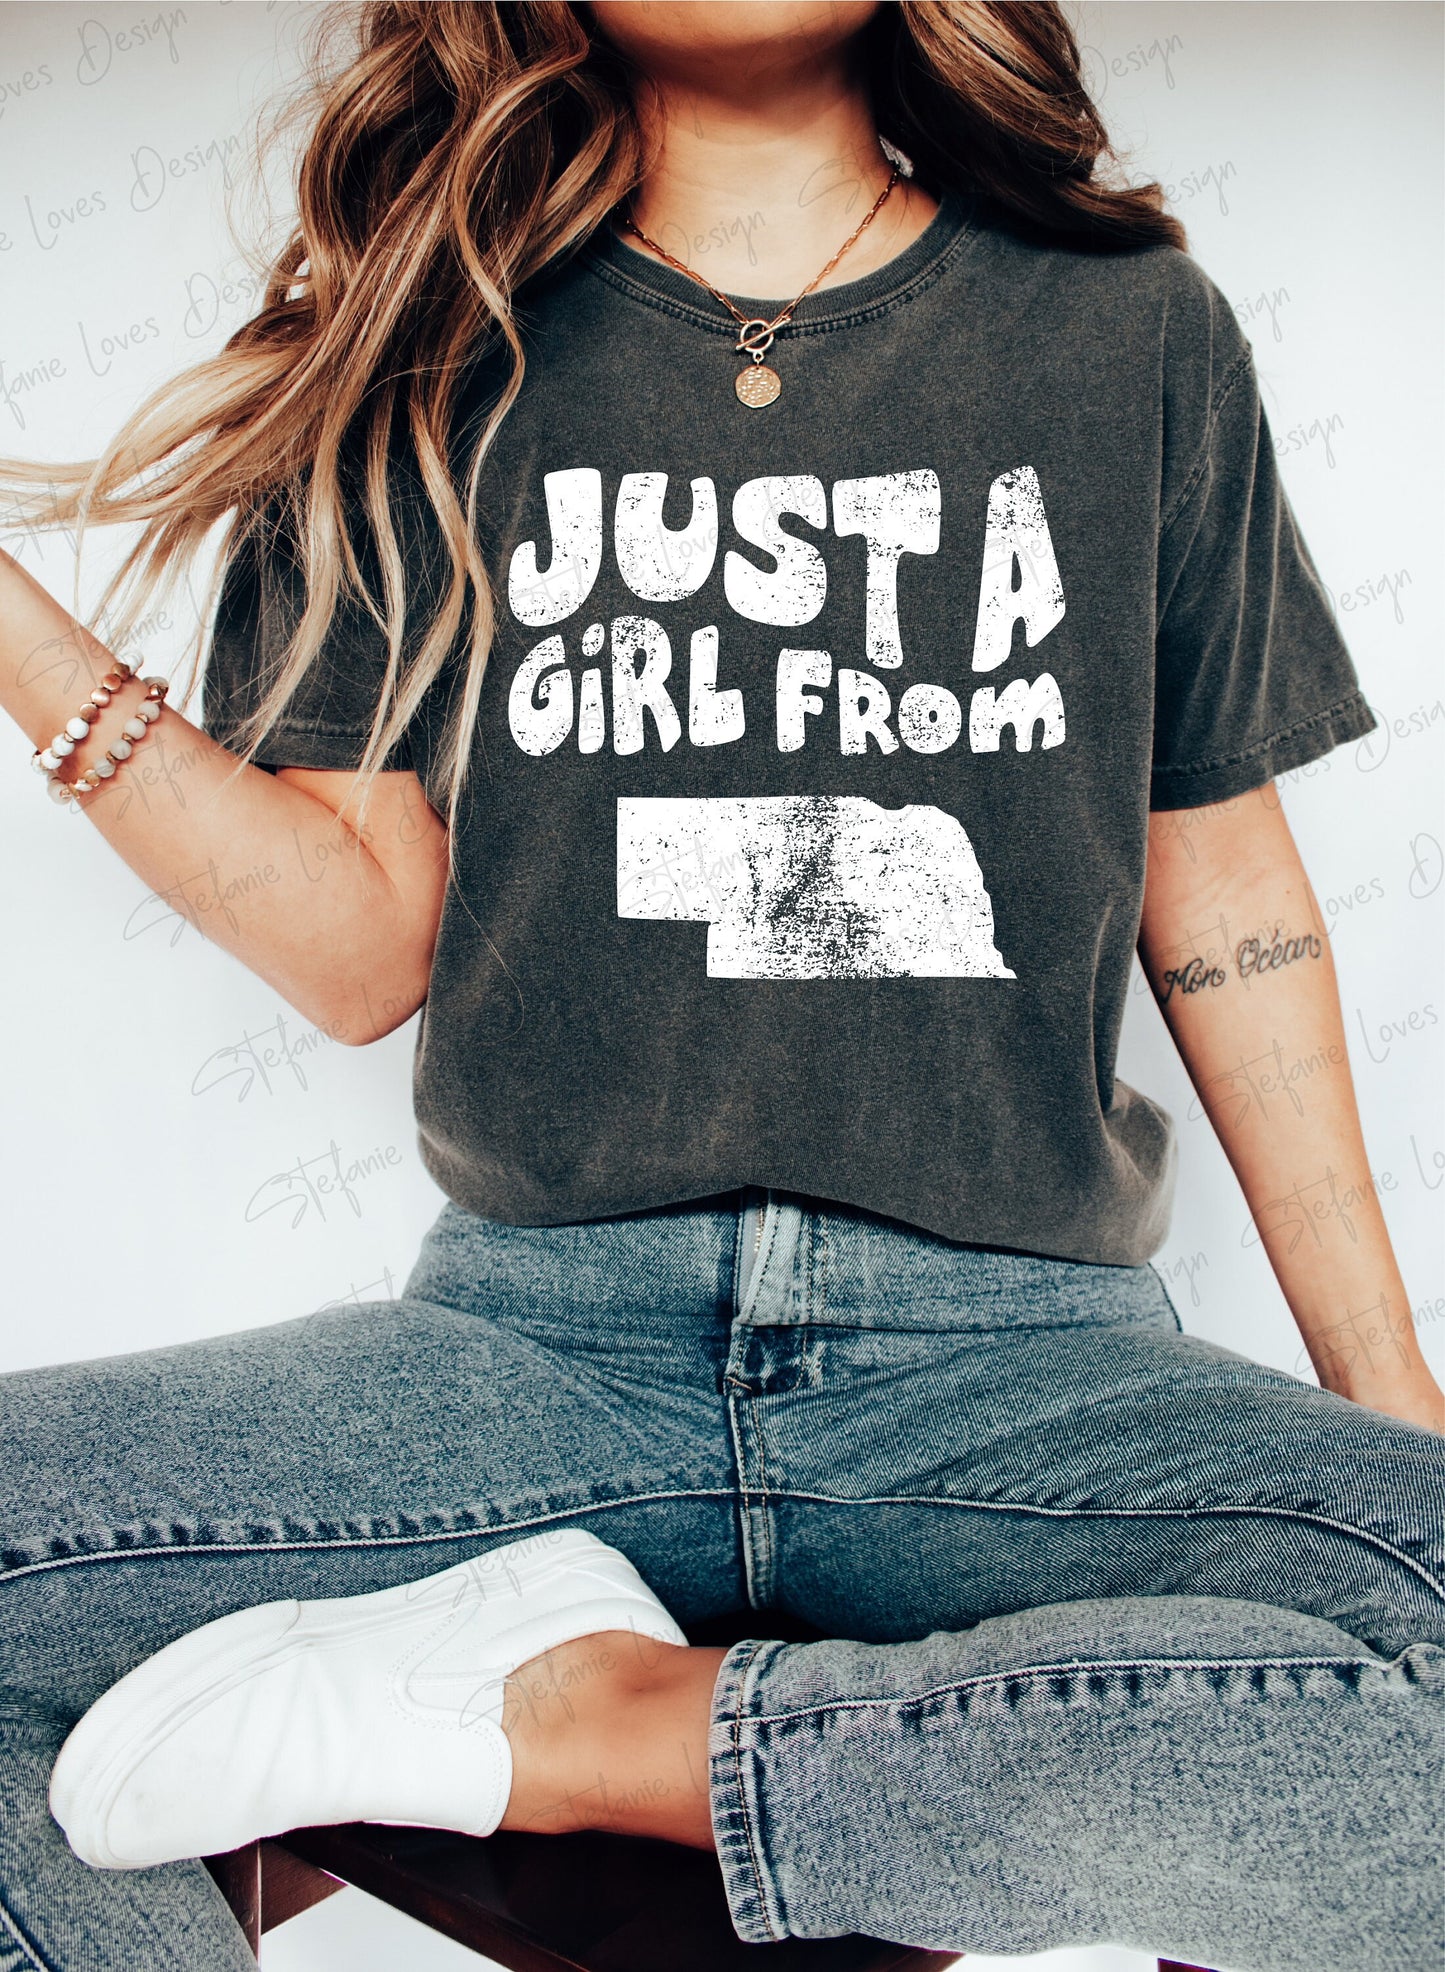 Just A Girl From Nebraska png, Distressed Nebraska png, Nebraska Shirt png, Nebraska Girl, Digital Design